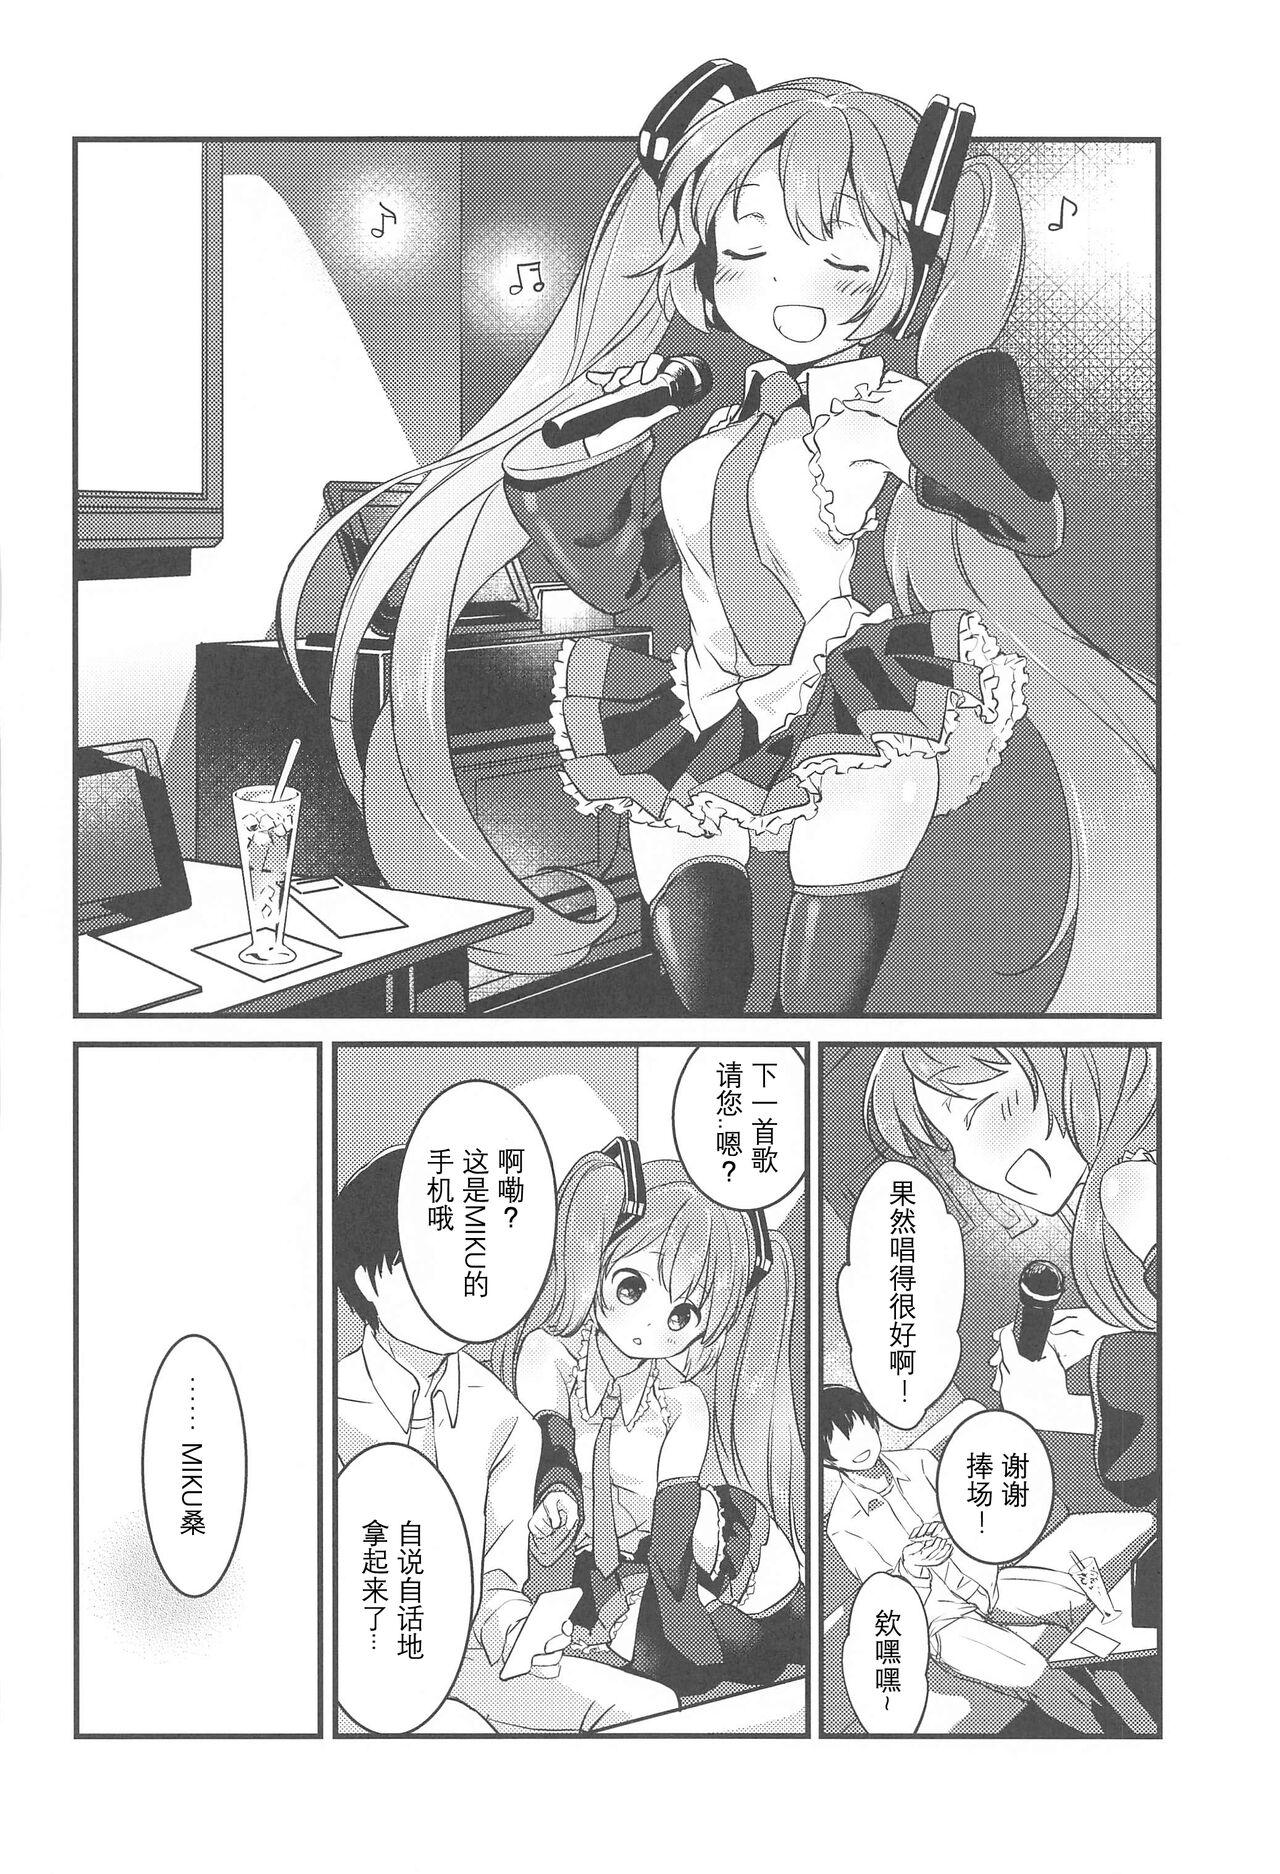 Unshaved room309 - Vocaloid Love Making - Page 4